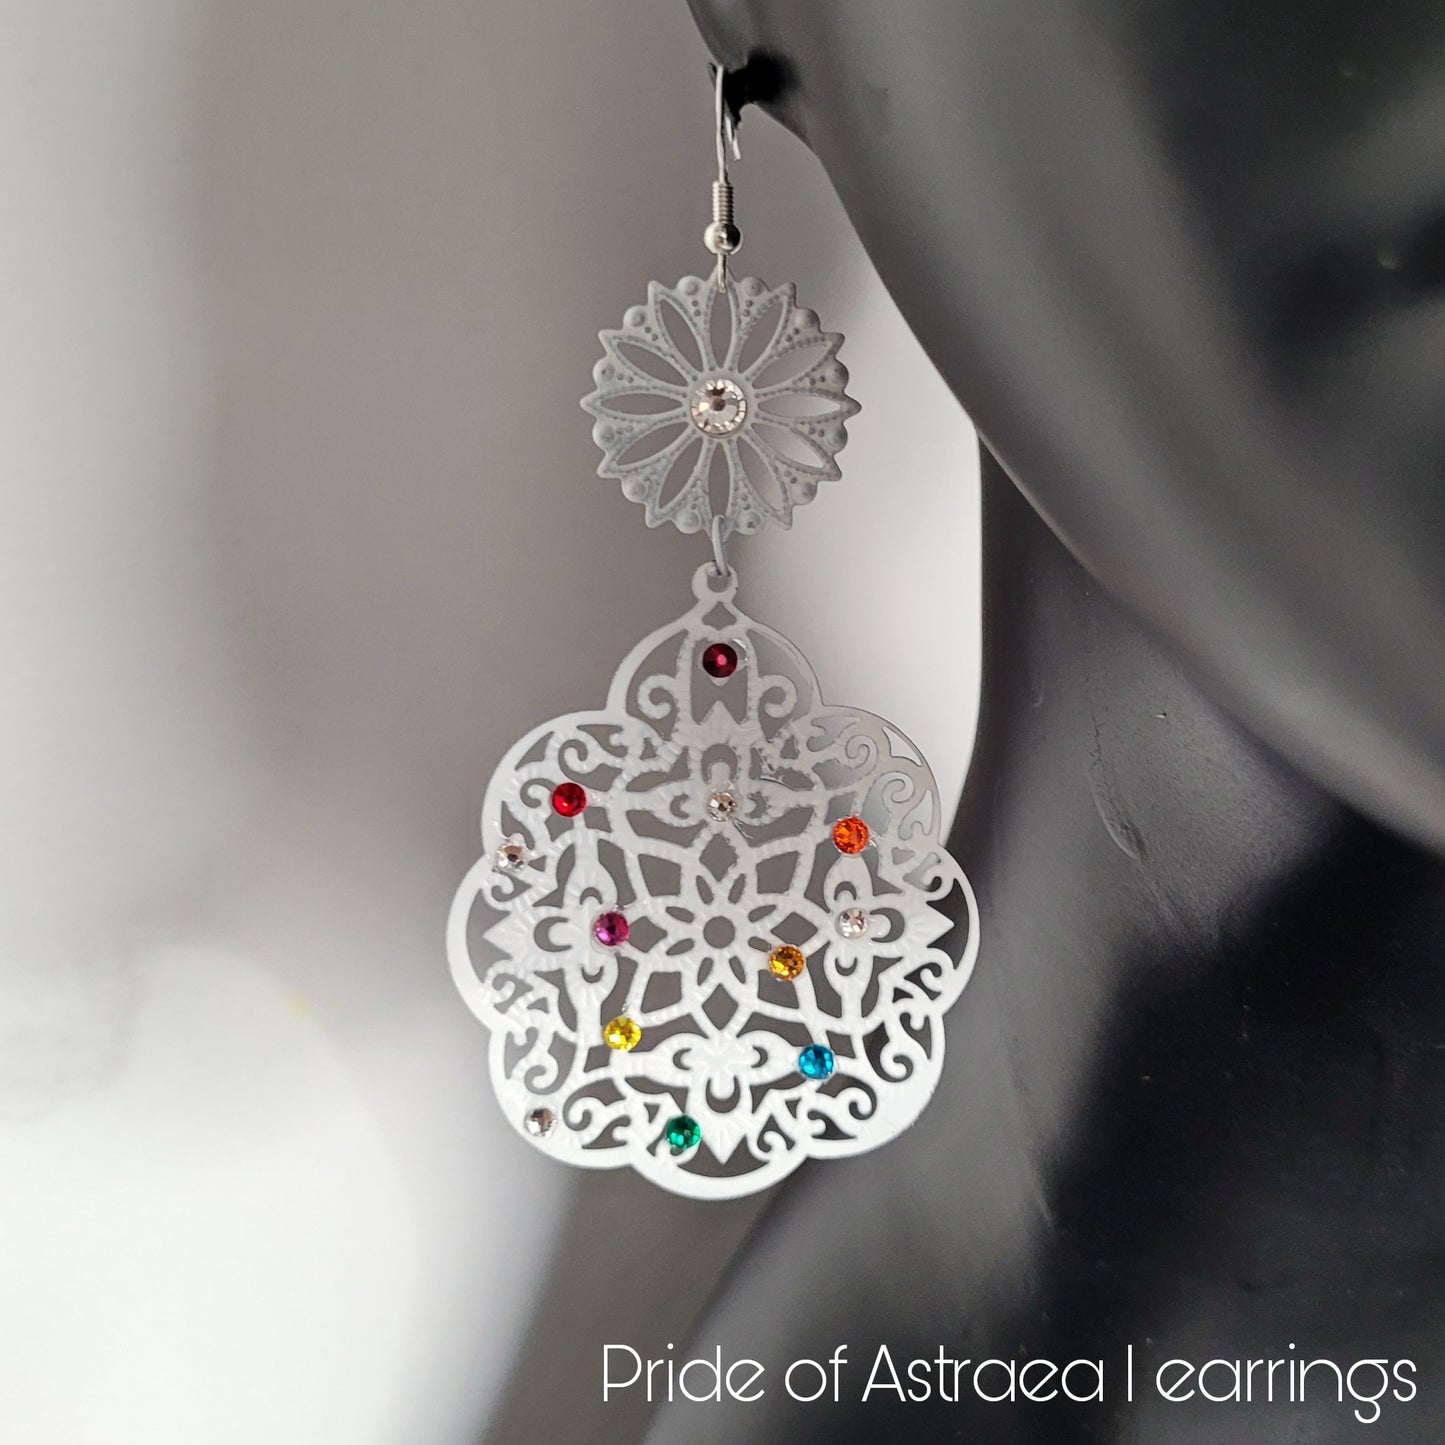 Deusa ex Machina collection: The Pride of Astraea earrings